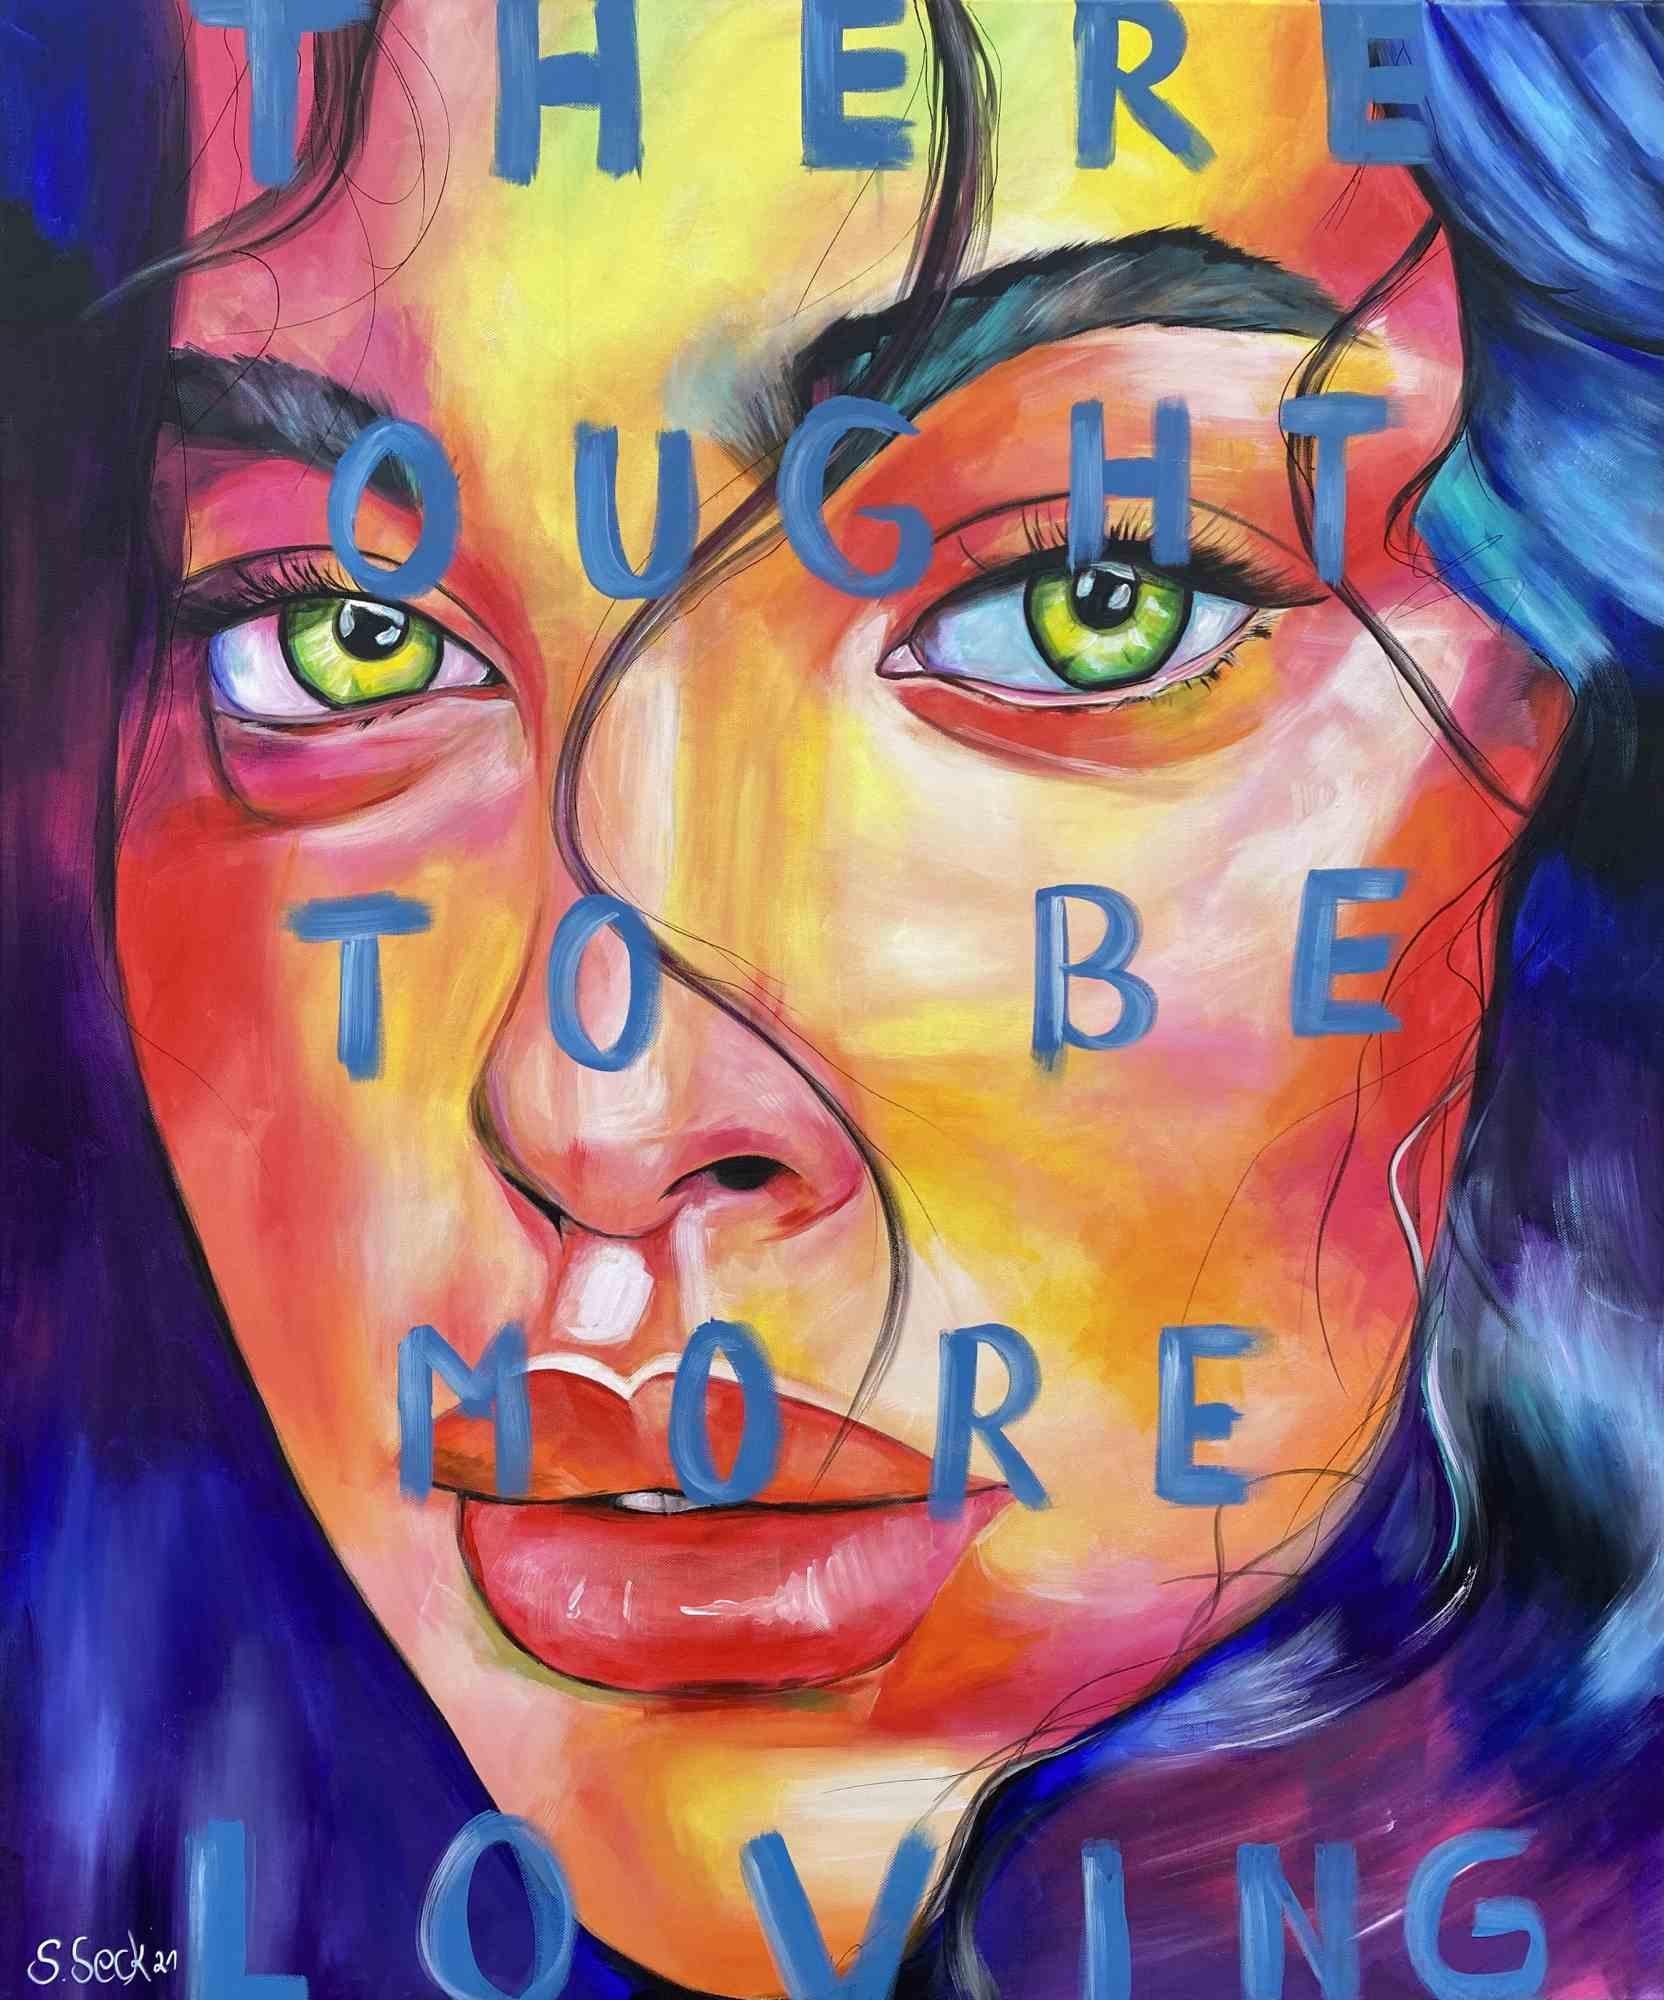 Acrylic on canvas. Certificate of authenticity by the Artist.

Longing is reflected in Julia's eyes. Only she knows why. However, “there ought to be more loving” - “we should give more love” is a message that would change the world if it were so.